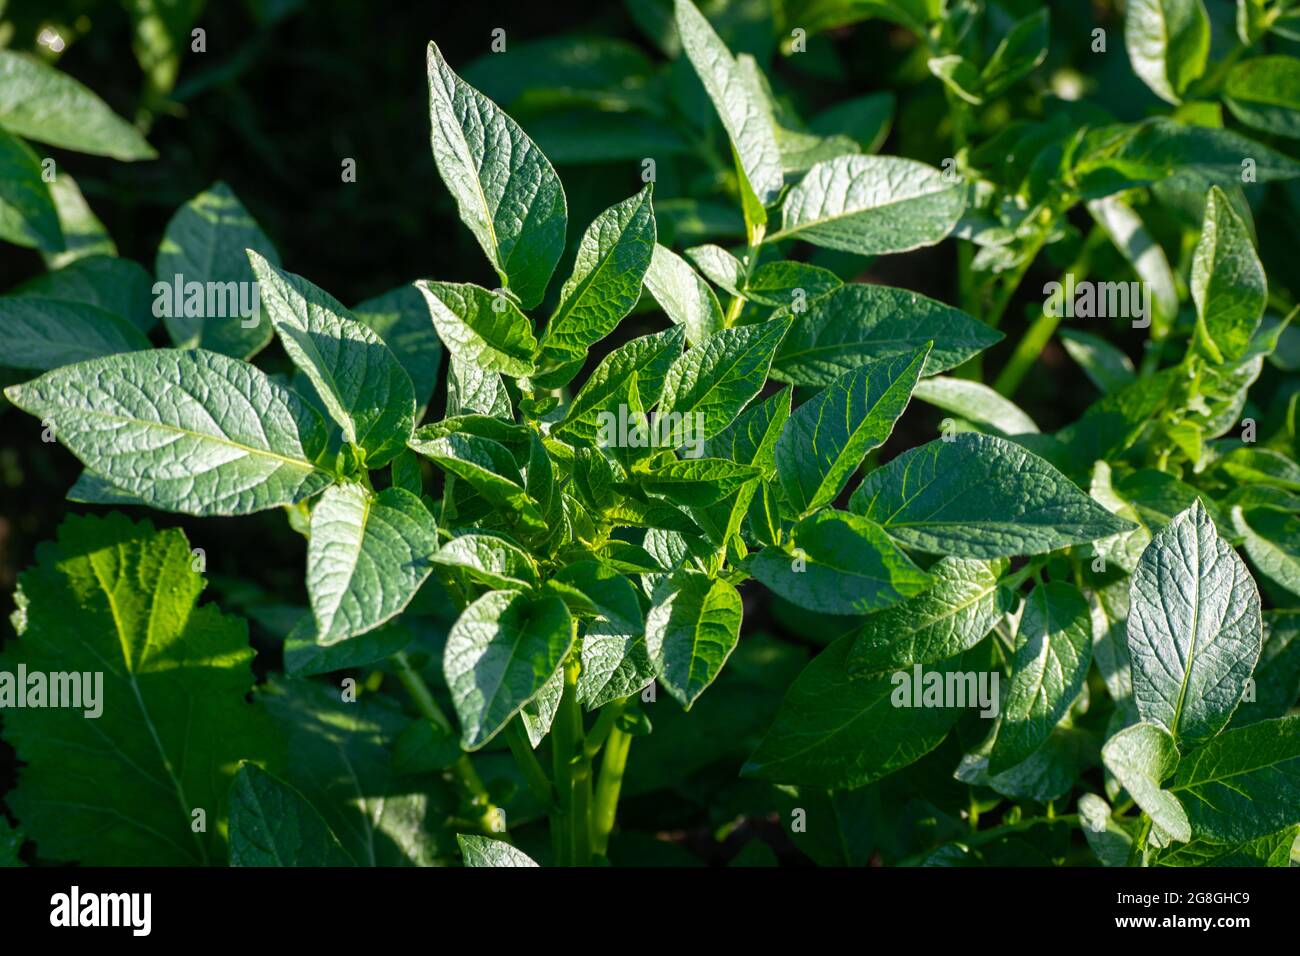 Young potato plant growing on the soil. Natural outdoor background. Stock Photo